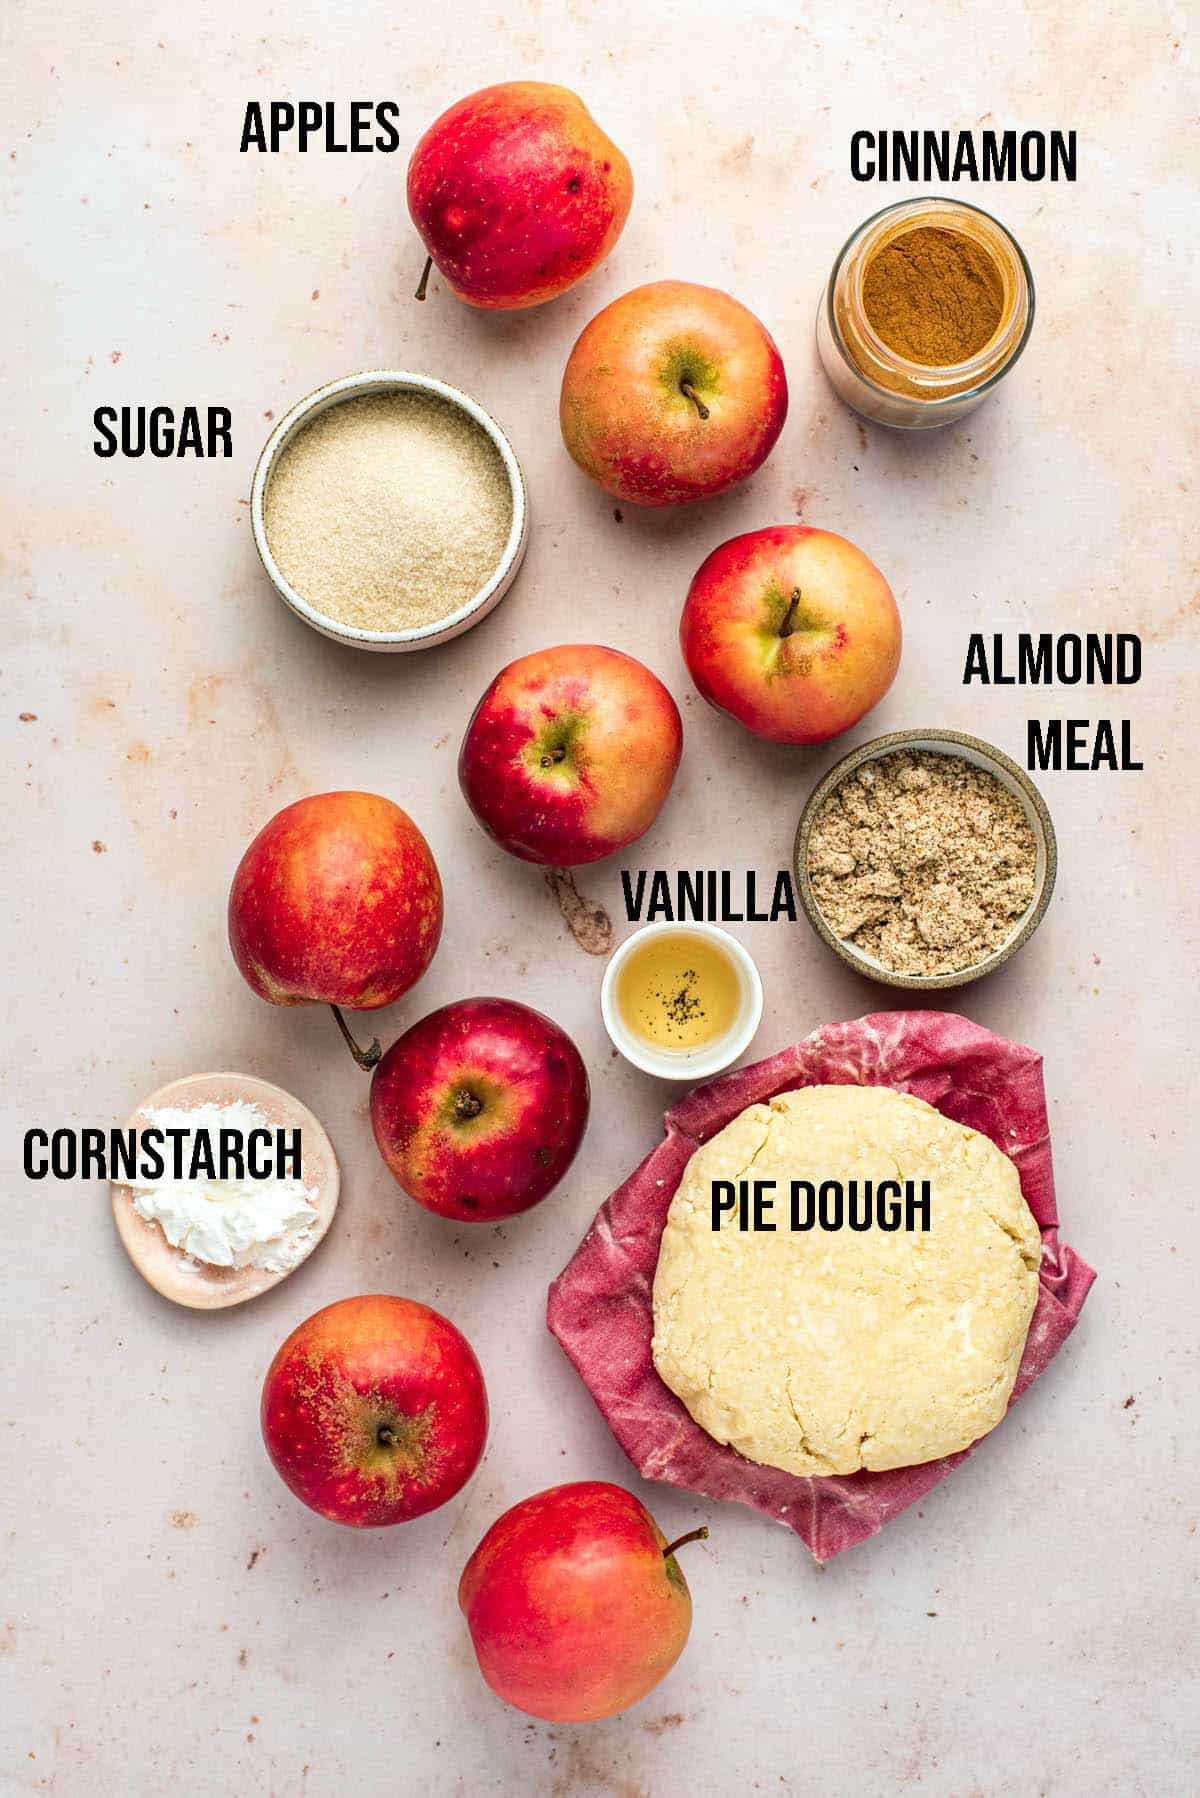 Apple galette ingredients with labels.